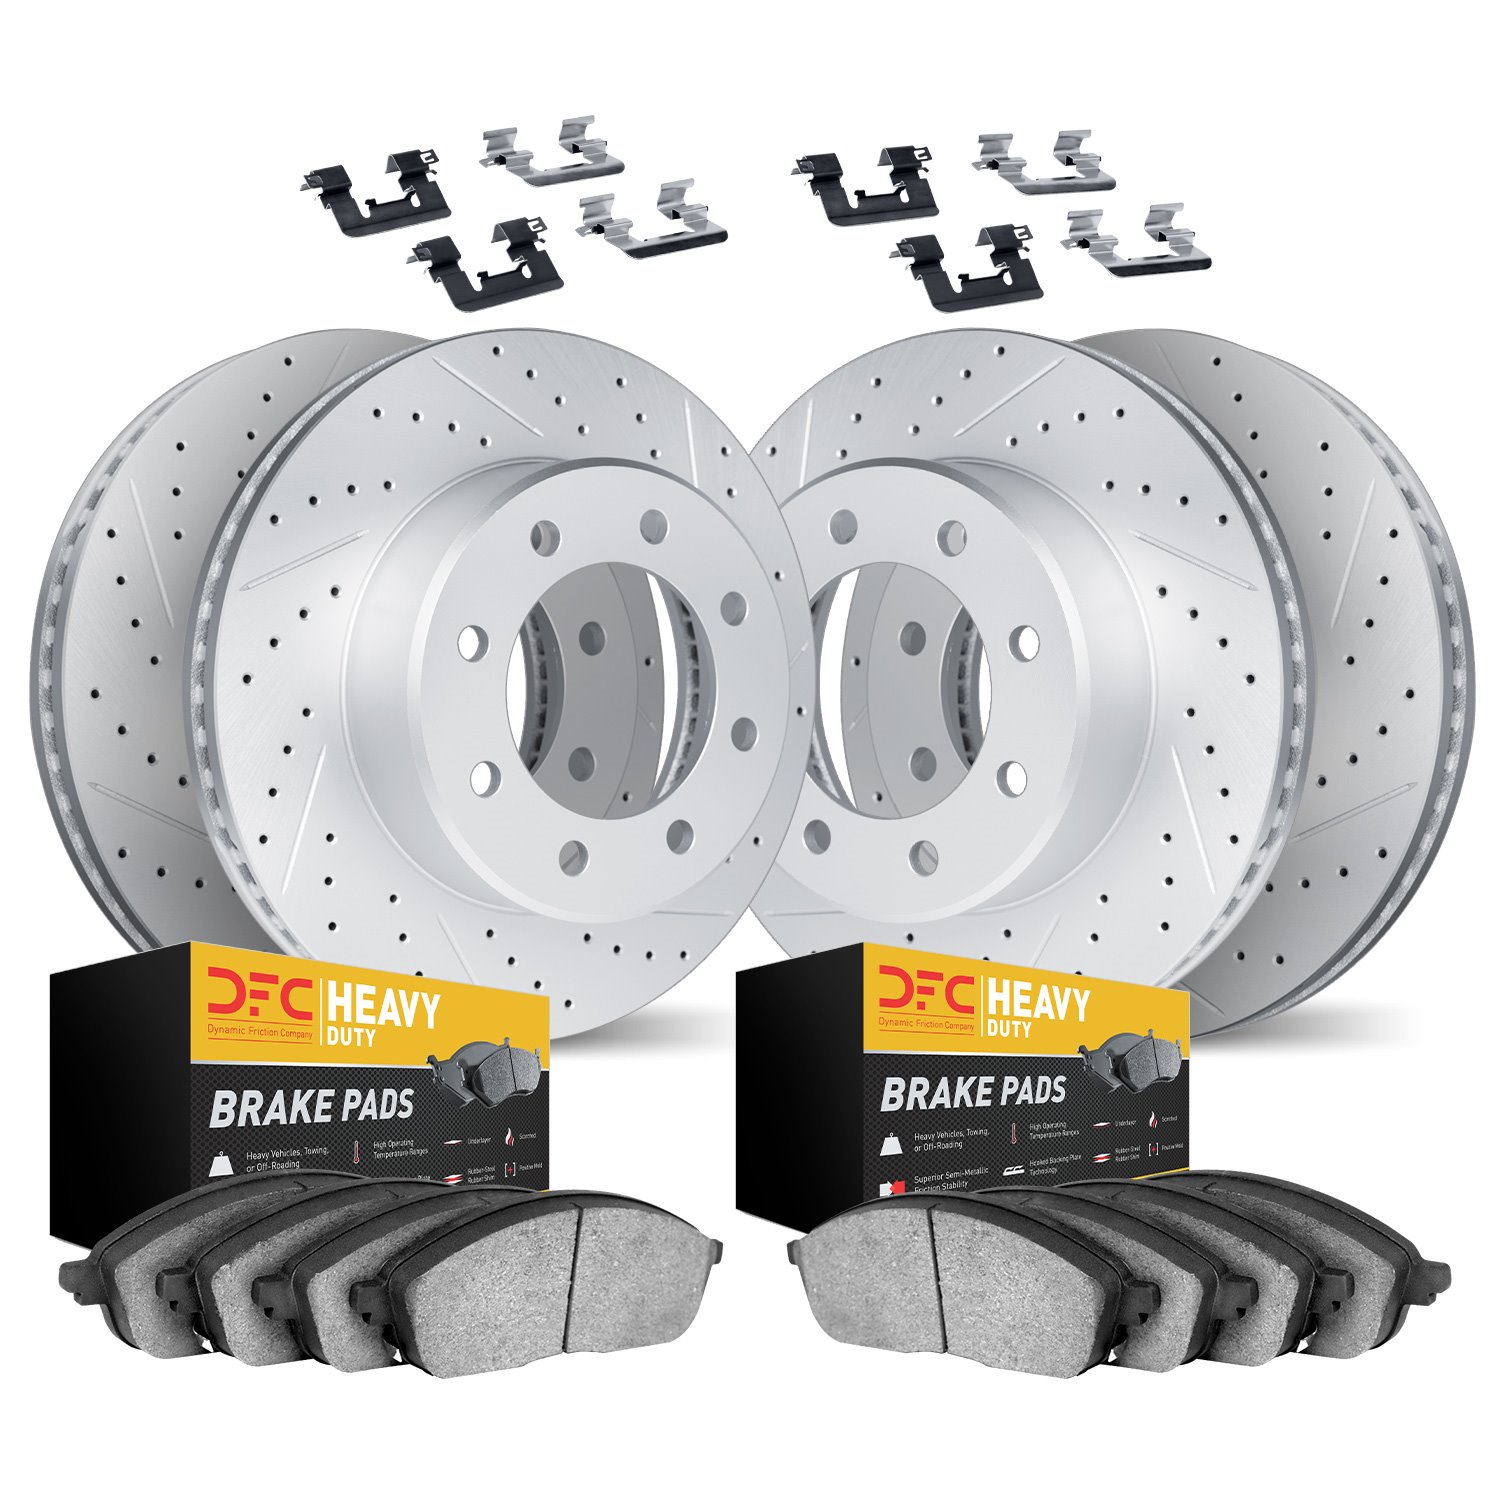 2214-99045 Geoperformance Drilled/Slotted Rotors w/Heavy-Duty Pads Kit & Hardware, 1999-1999 Ford/Lincoln/Mercury/Mazda, Positio